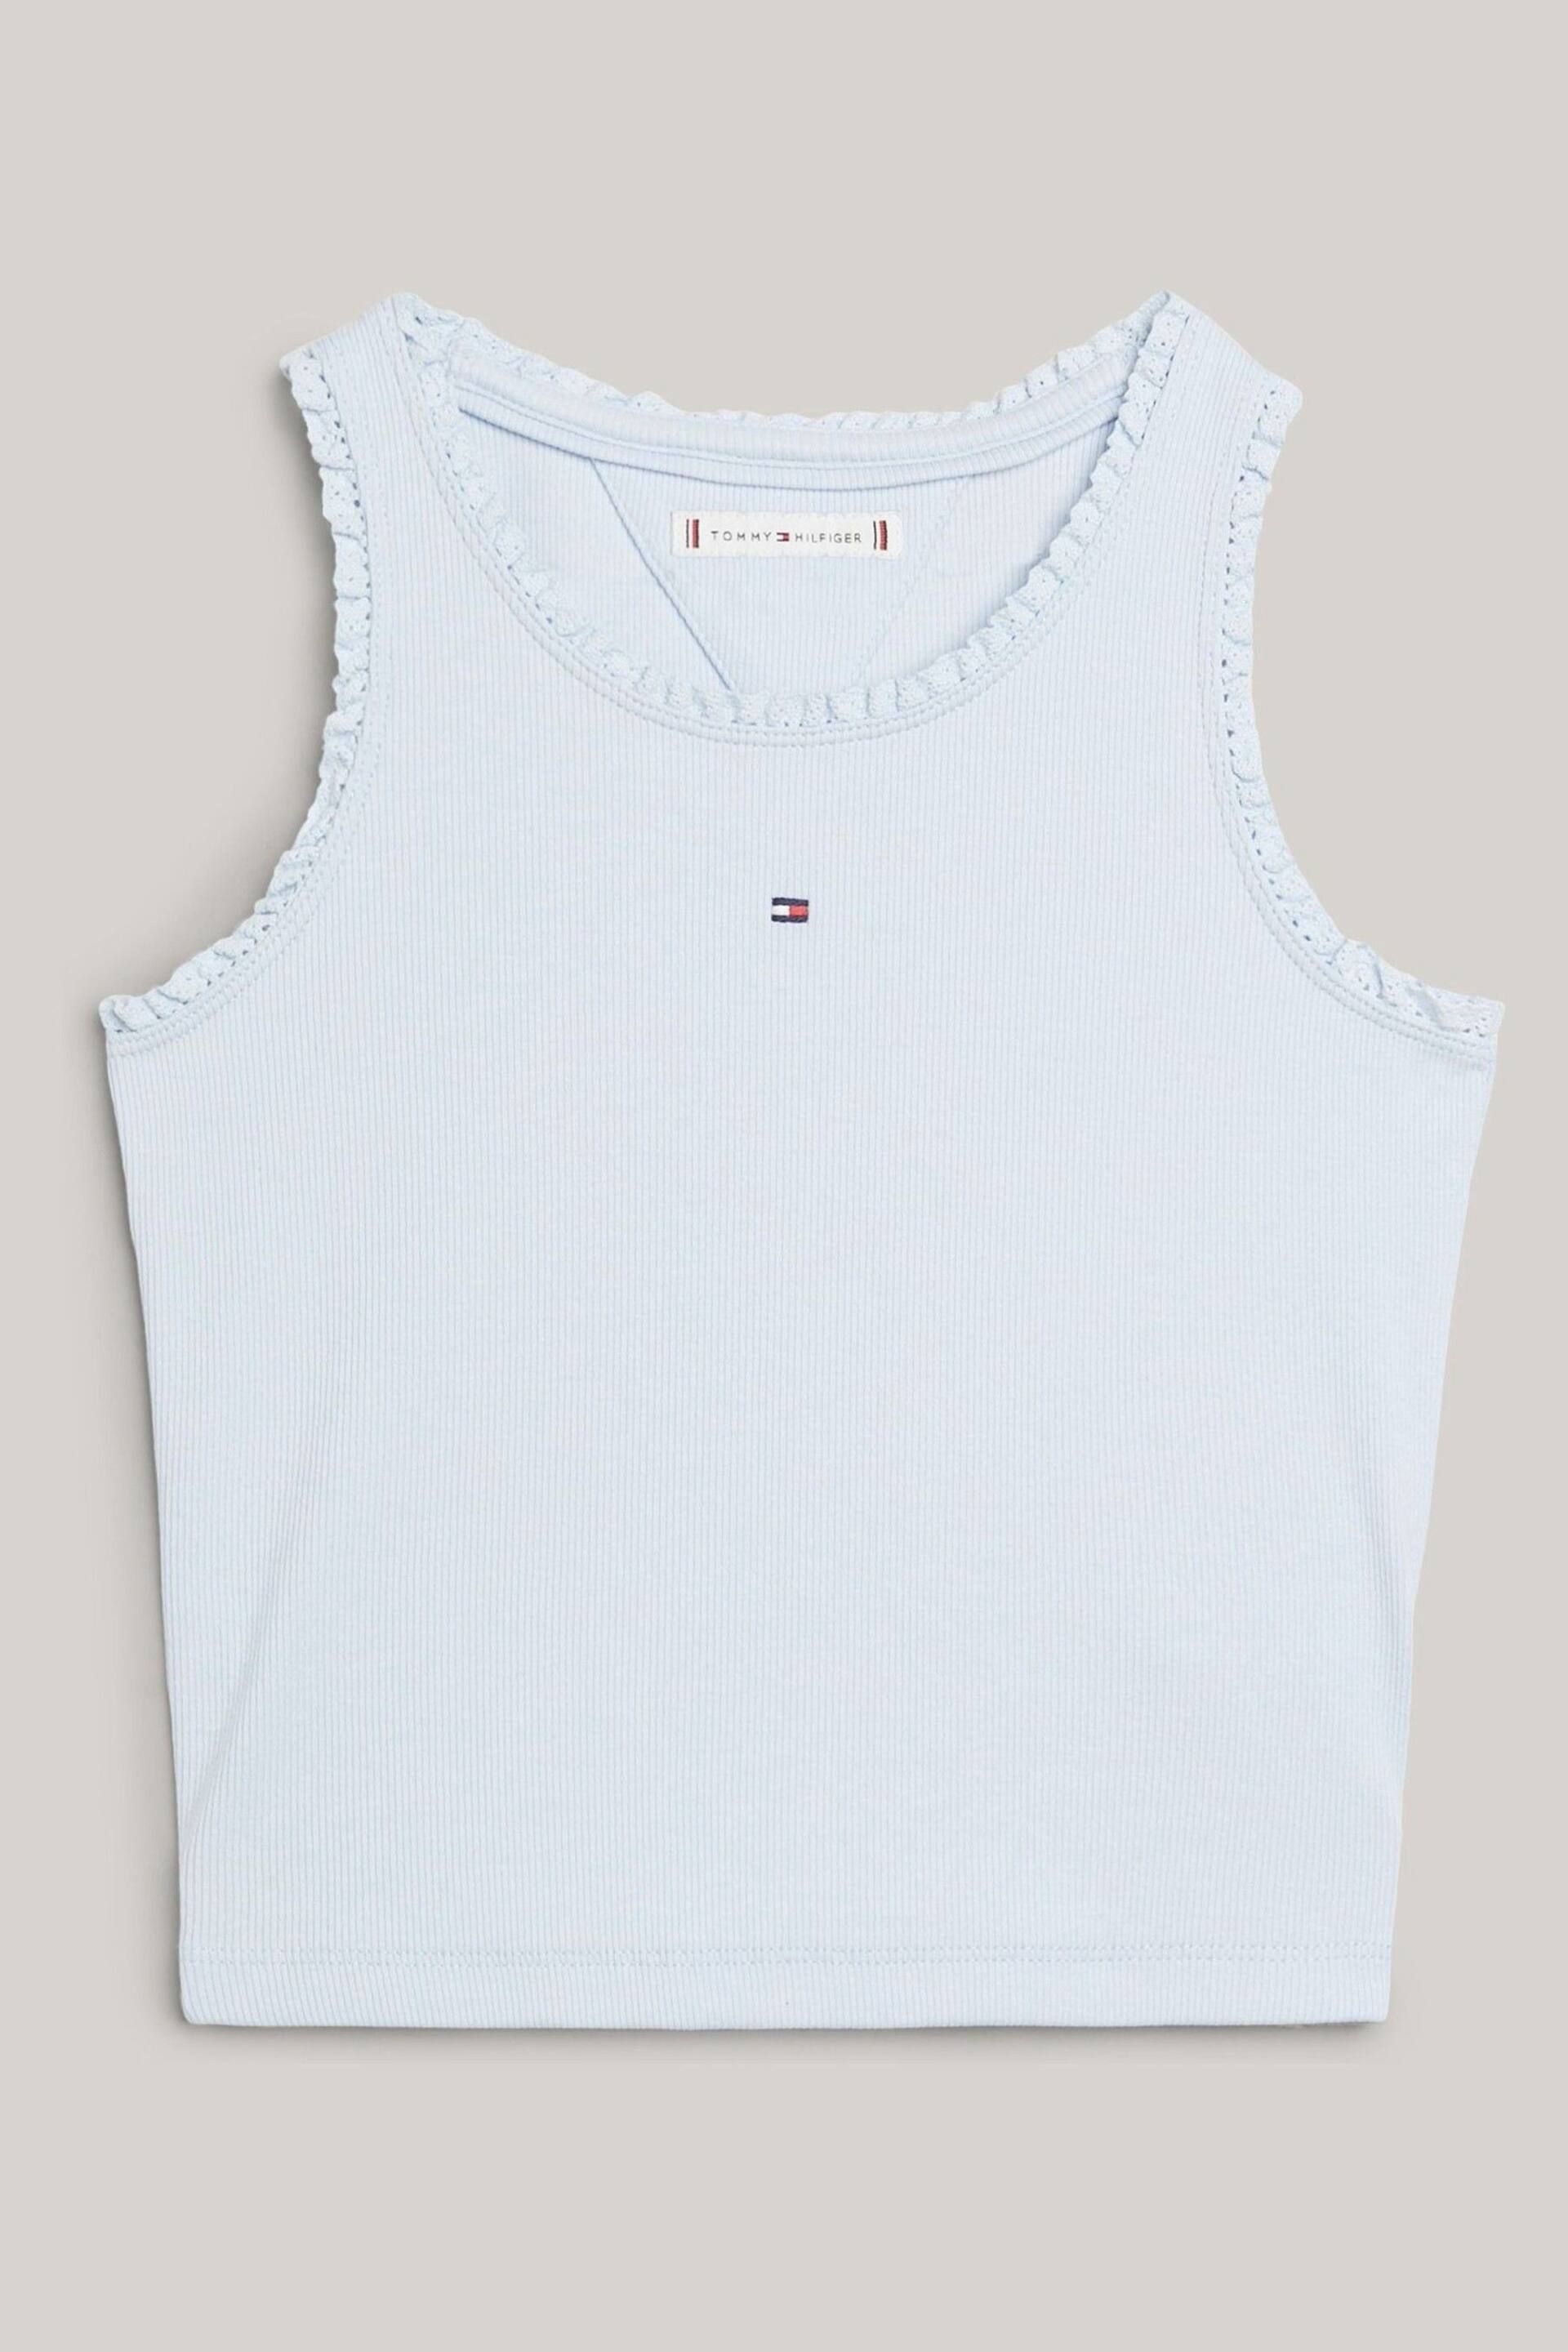 Tommy Hilfiger Blue Essential Tank Top - Image 5 of 7